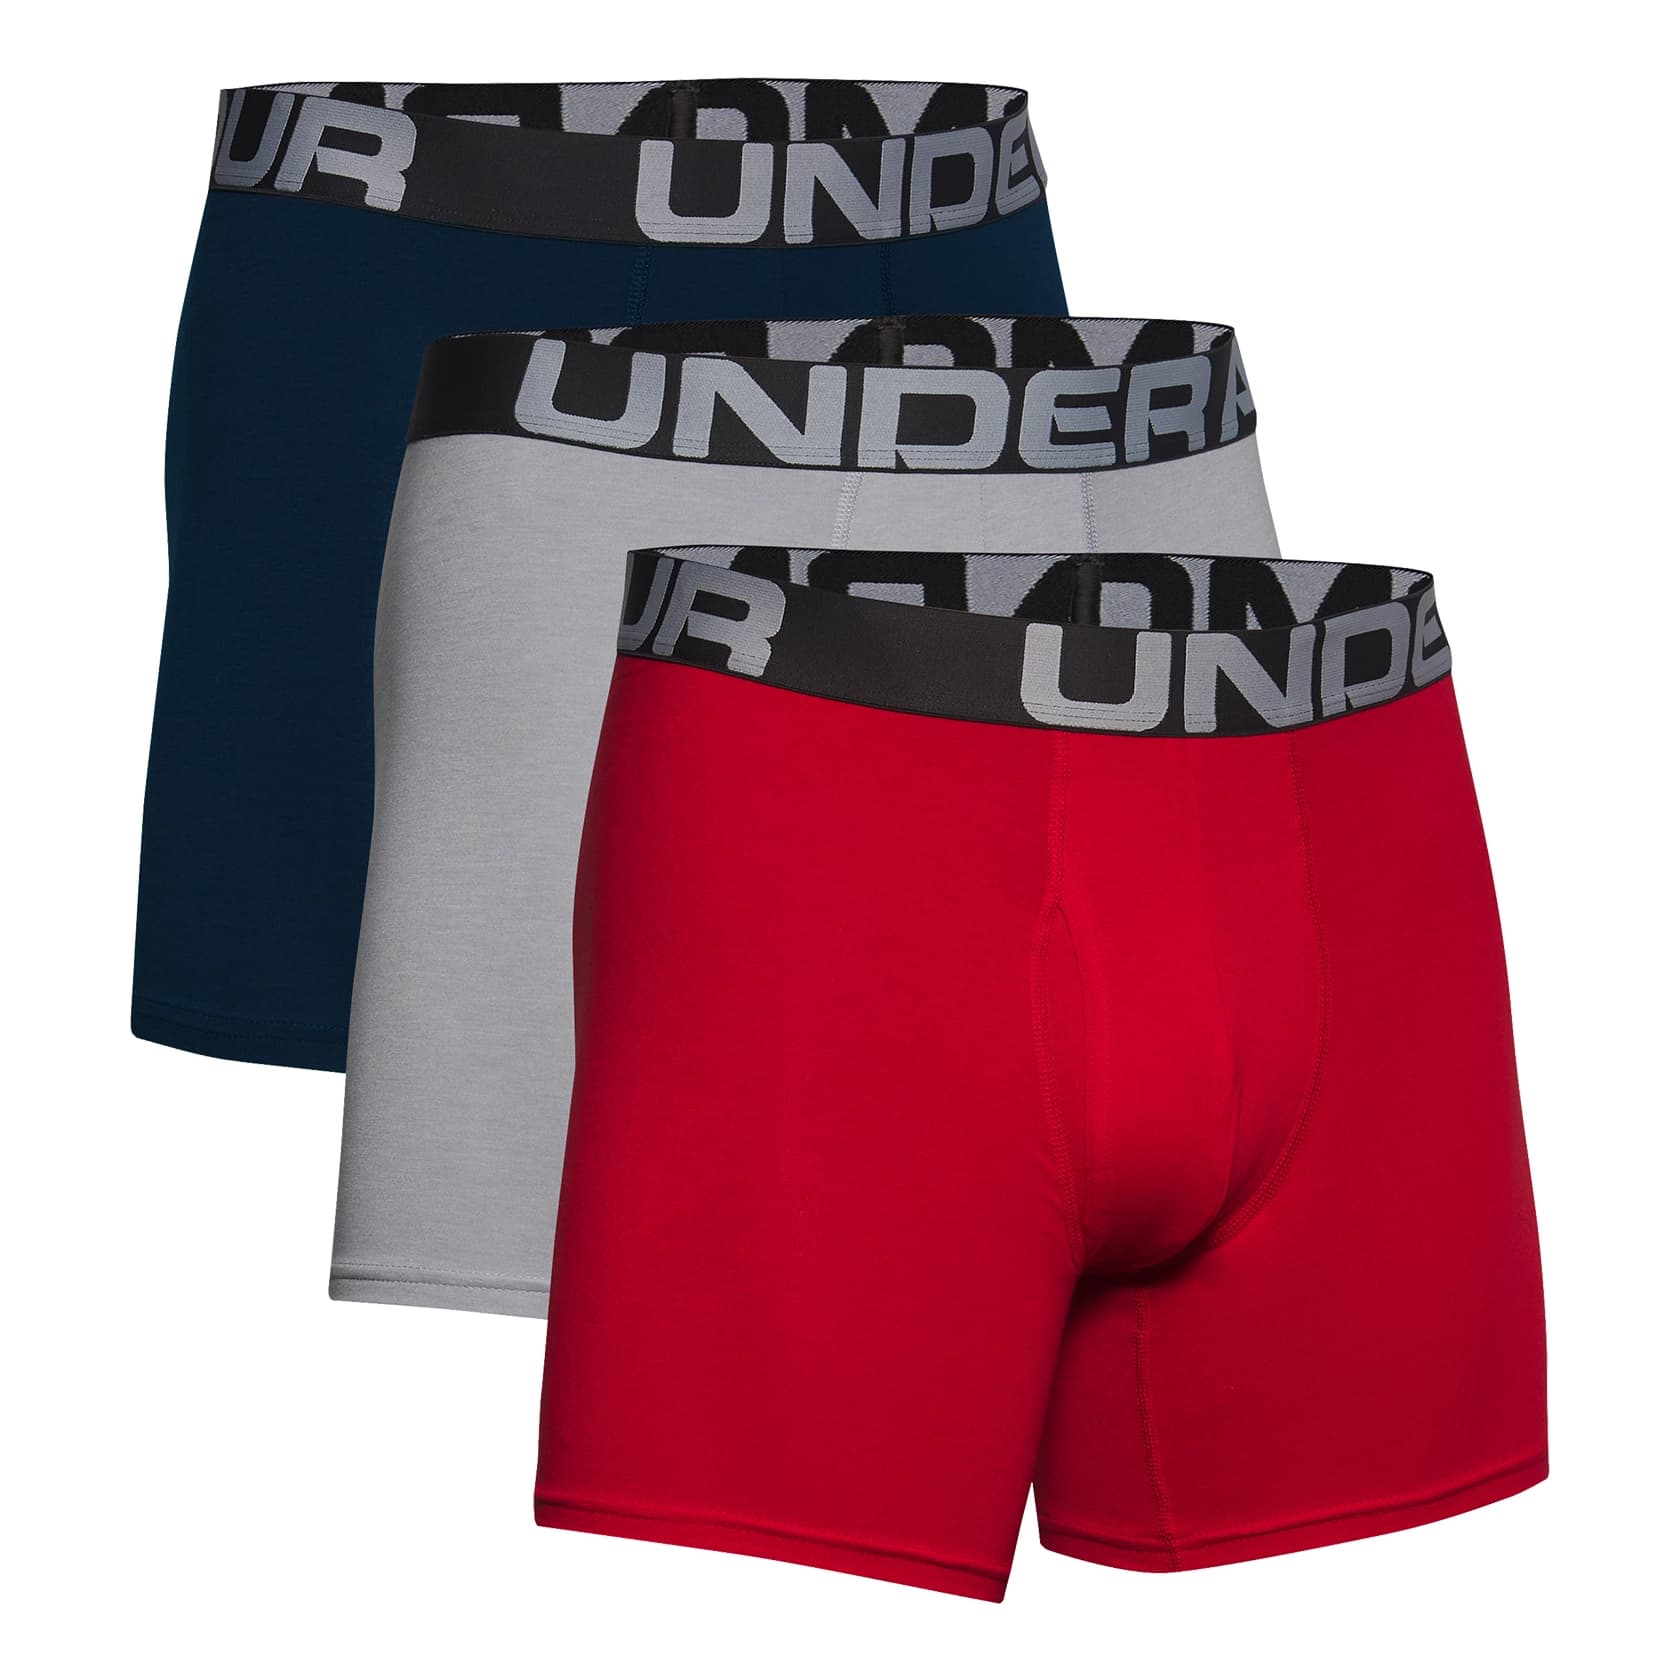 Under Armour® Men’s Charged Cotton® 6" Boxerjock® – 3-Pack - Red/Academy/Mod Grey